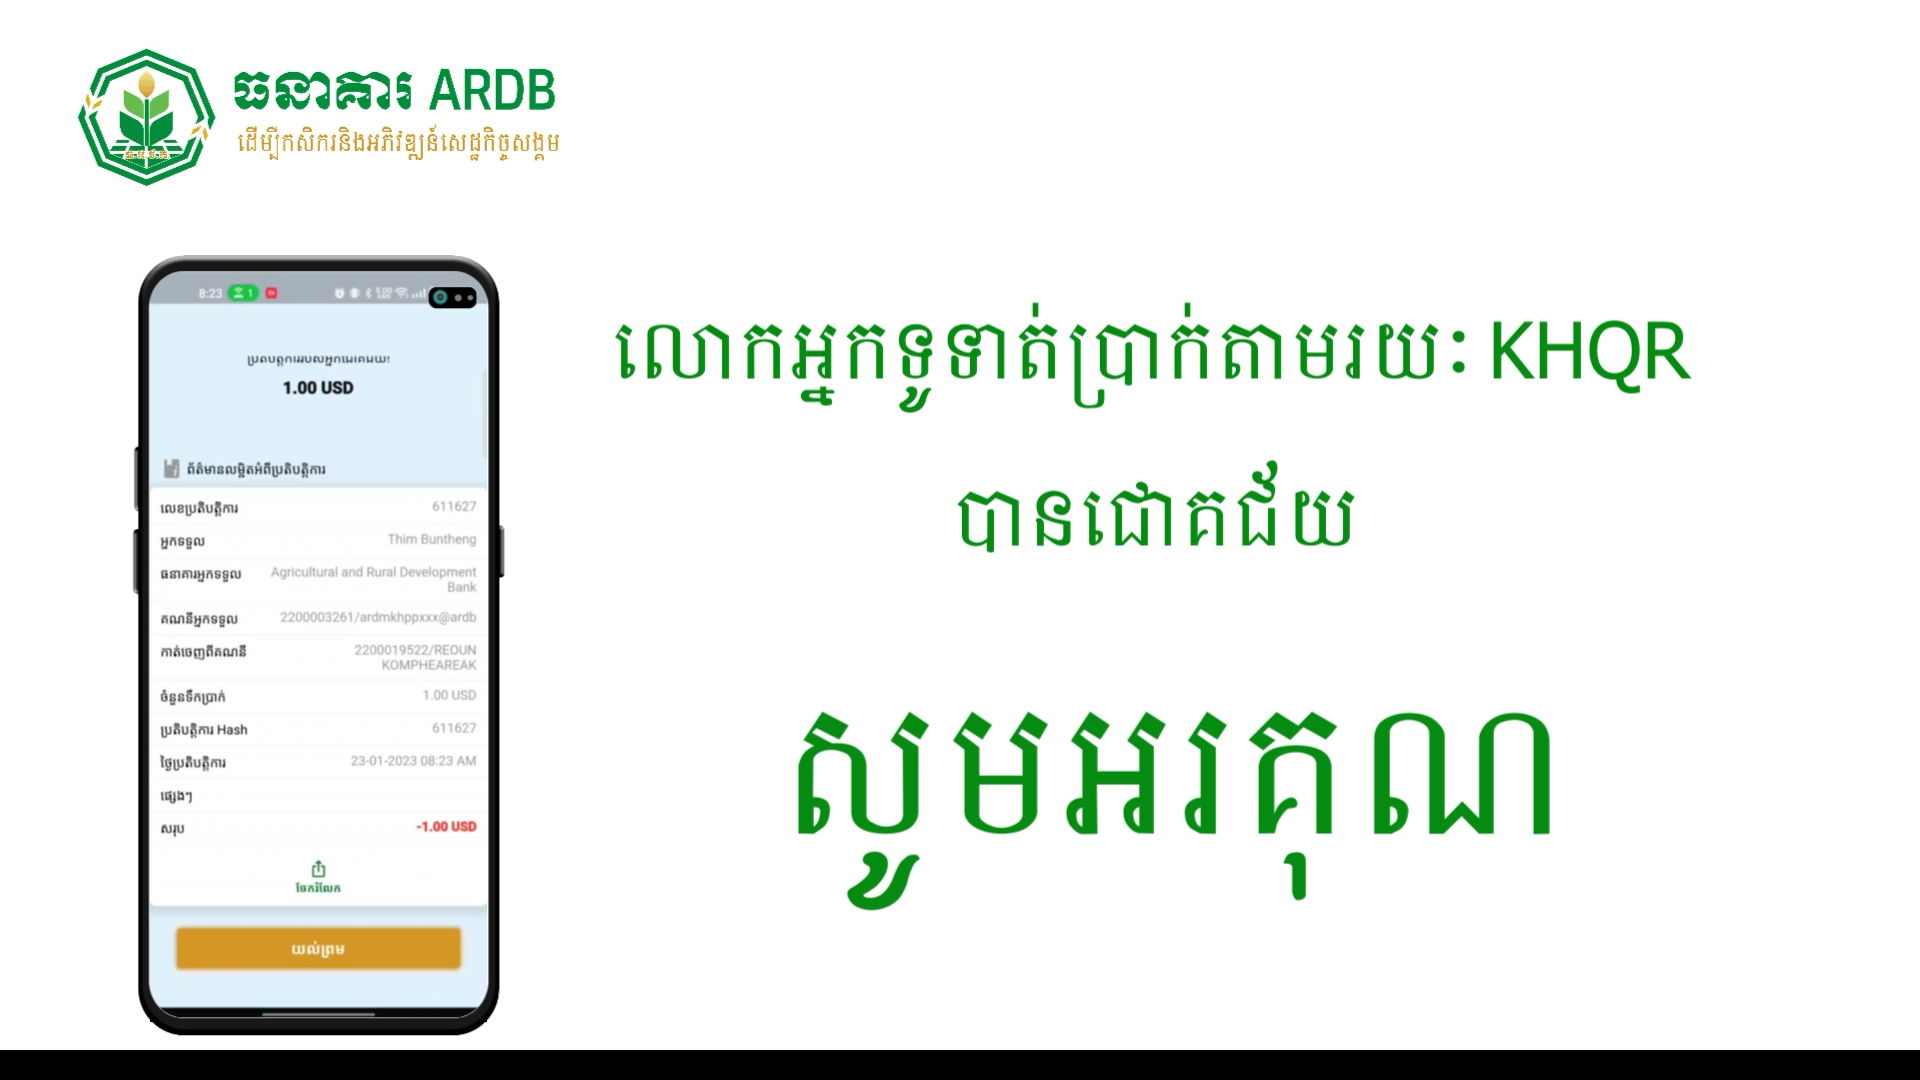 How to make payment on KHQR with Bakong members via ARDB Mobile app.